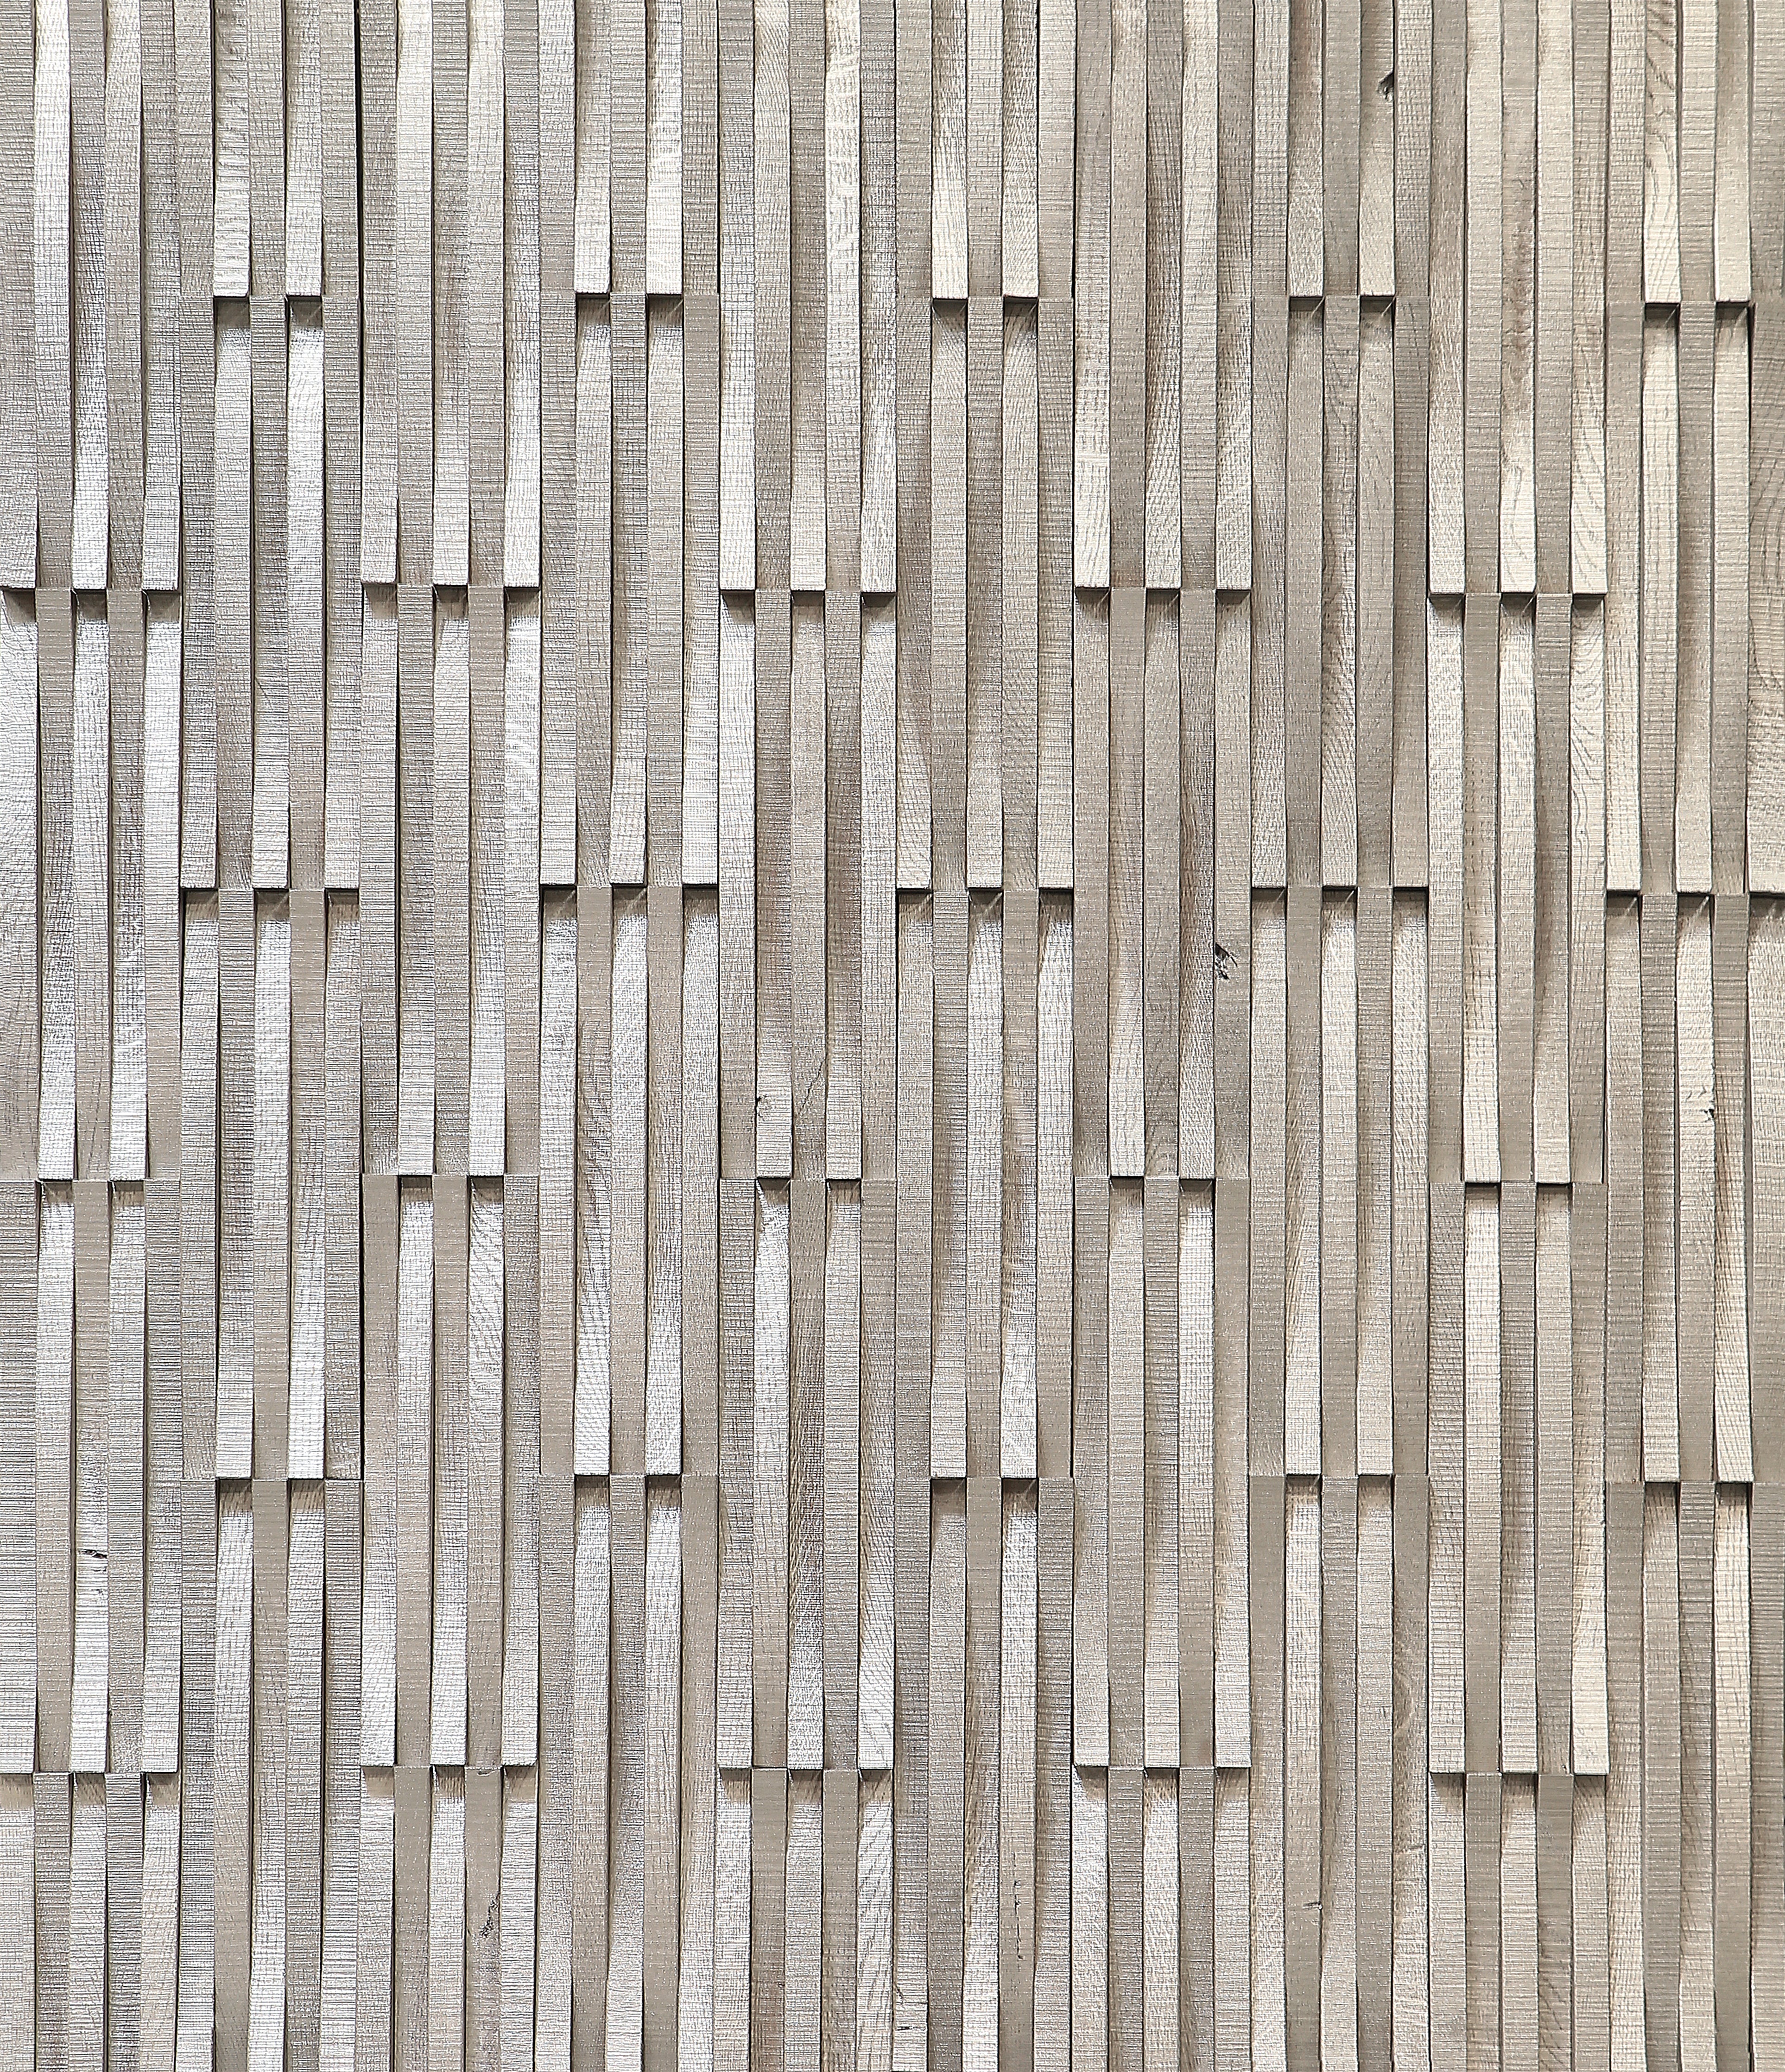 duchateau inceptiv curva silver oak three dimensional wall natural wood panel lacquer for interior use distributed by surface group international